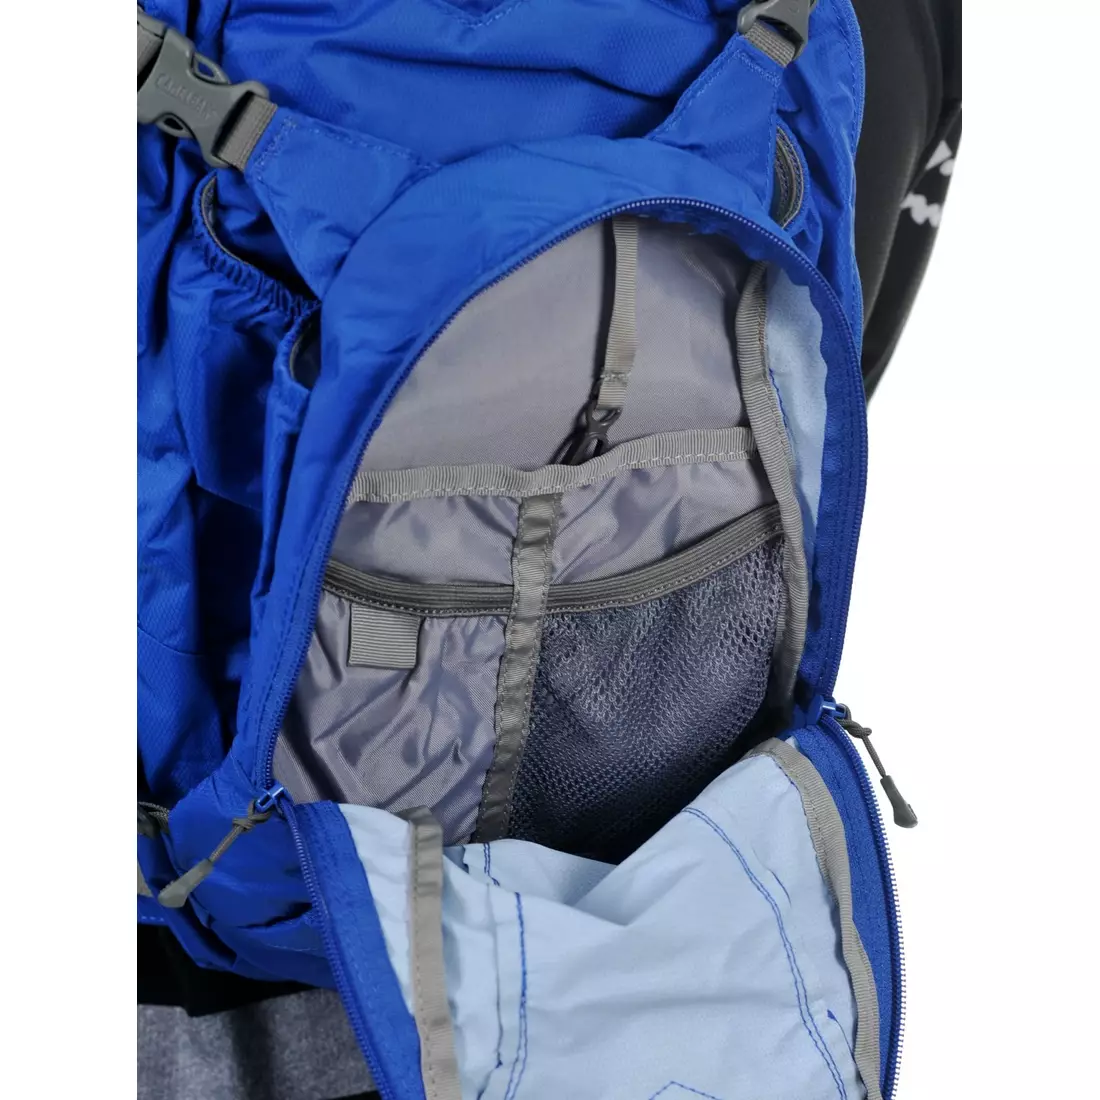 CAMELBAK SS15 MULE 100 2014 backpack with water bladder. pure blue